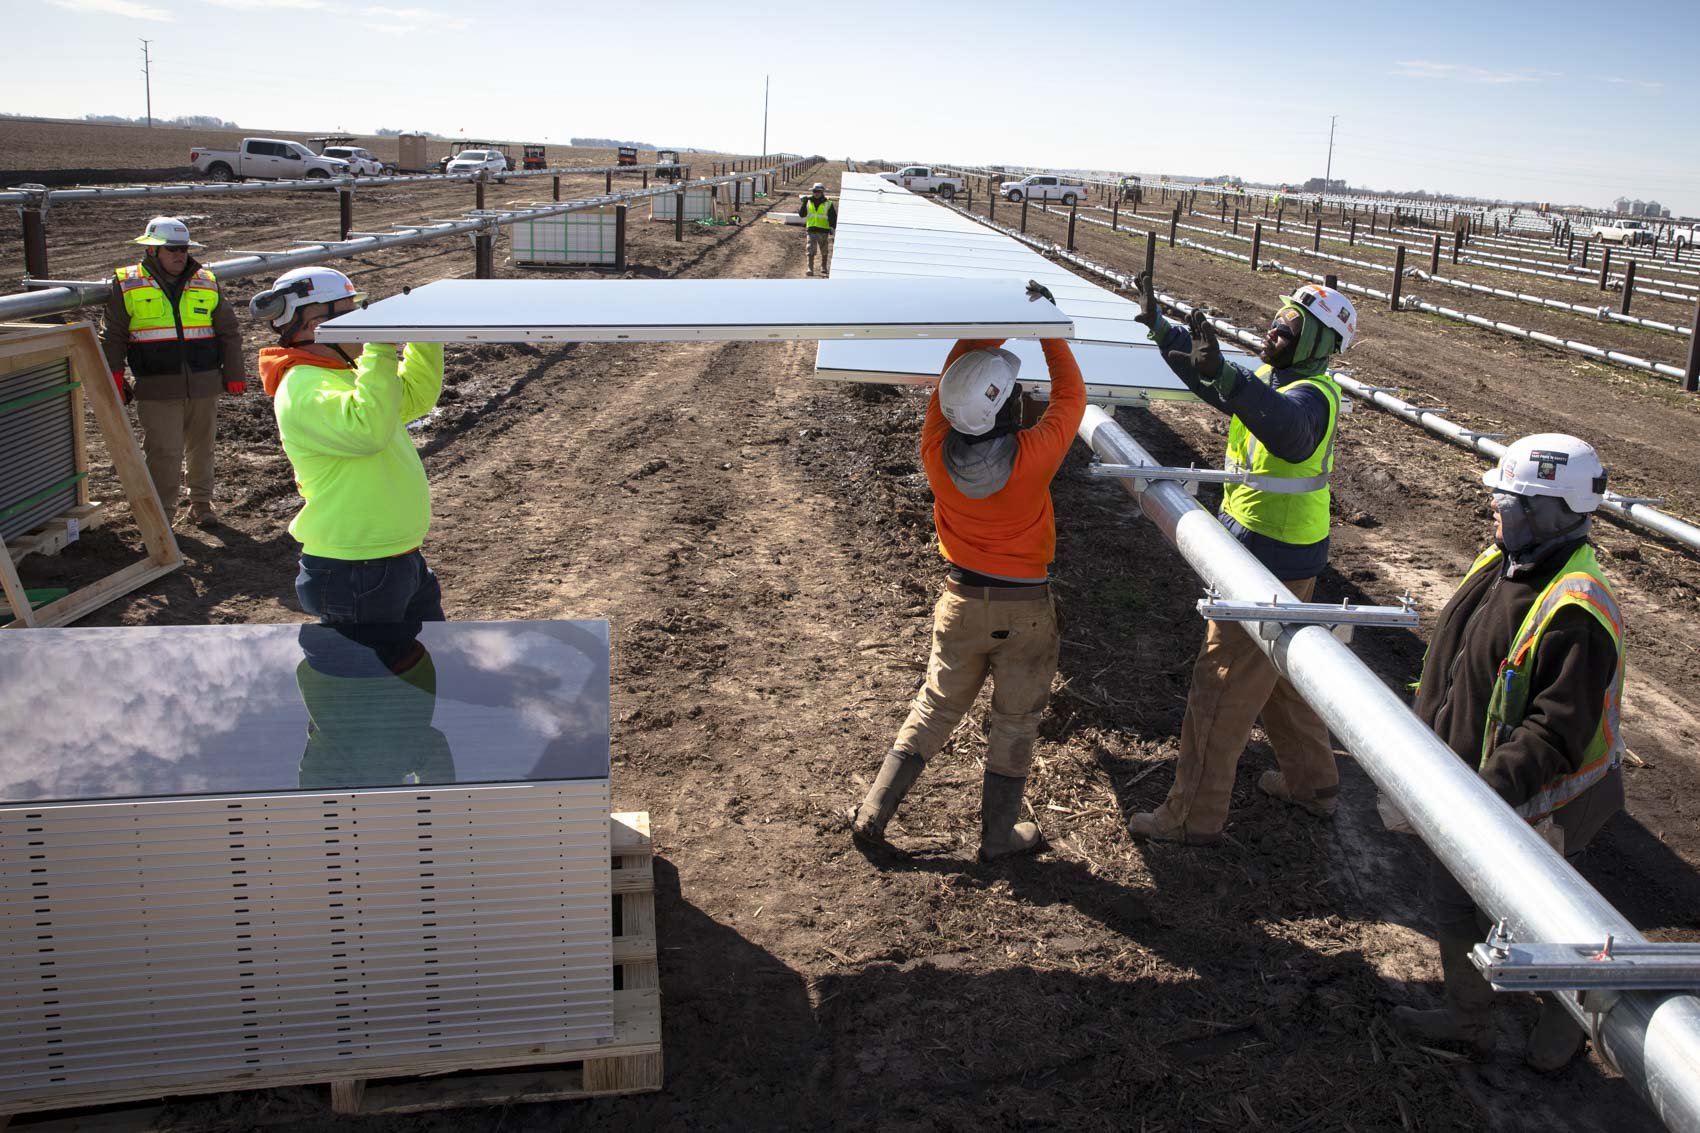  Swift Current Double Black Diamond solar project in southeast Sangamon County, first day of panel installation Monday, March 20, 2023  near Virden, Ill. [Rich Saal] 